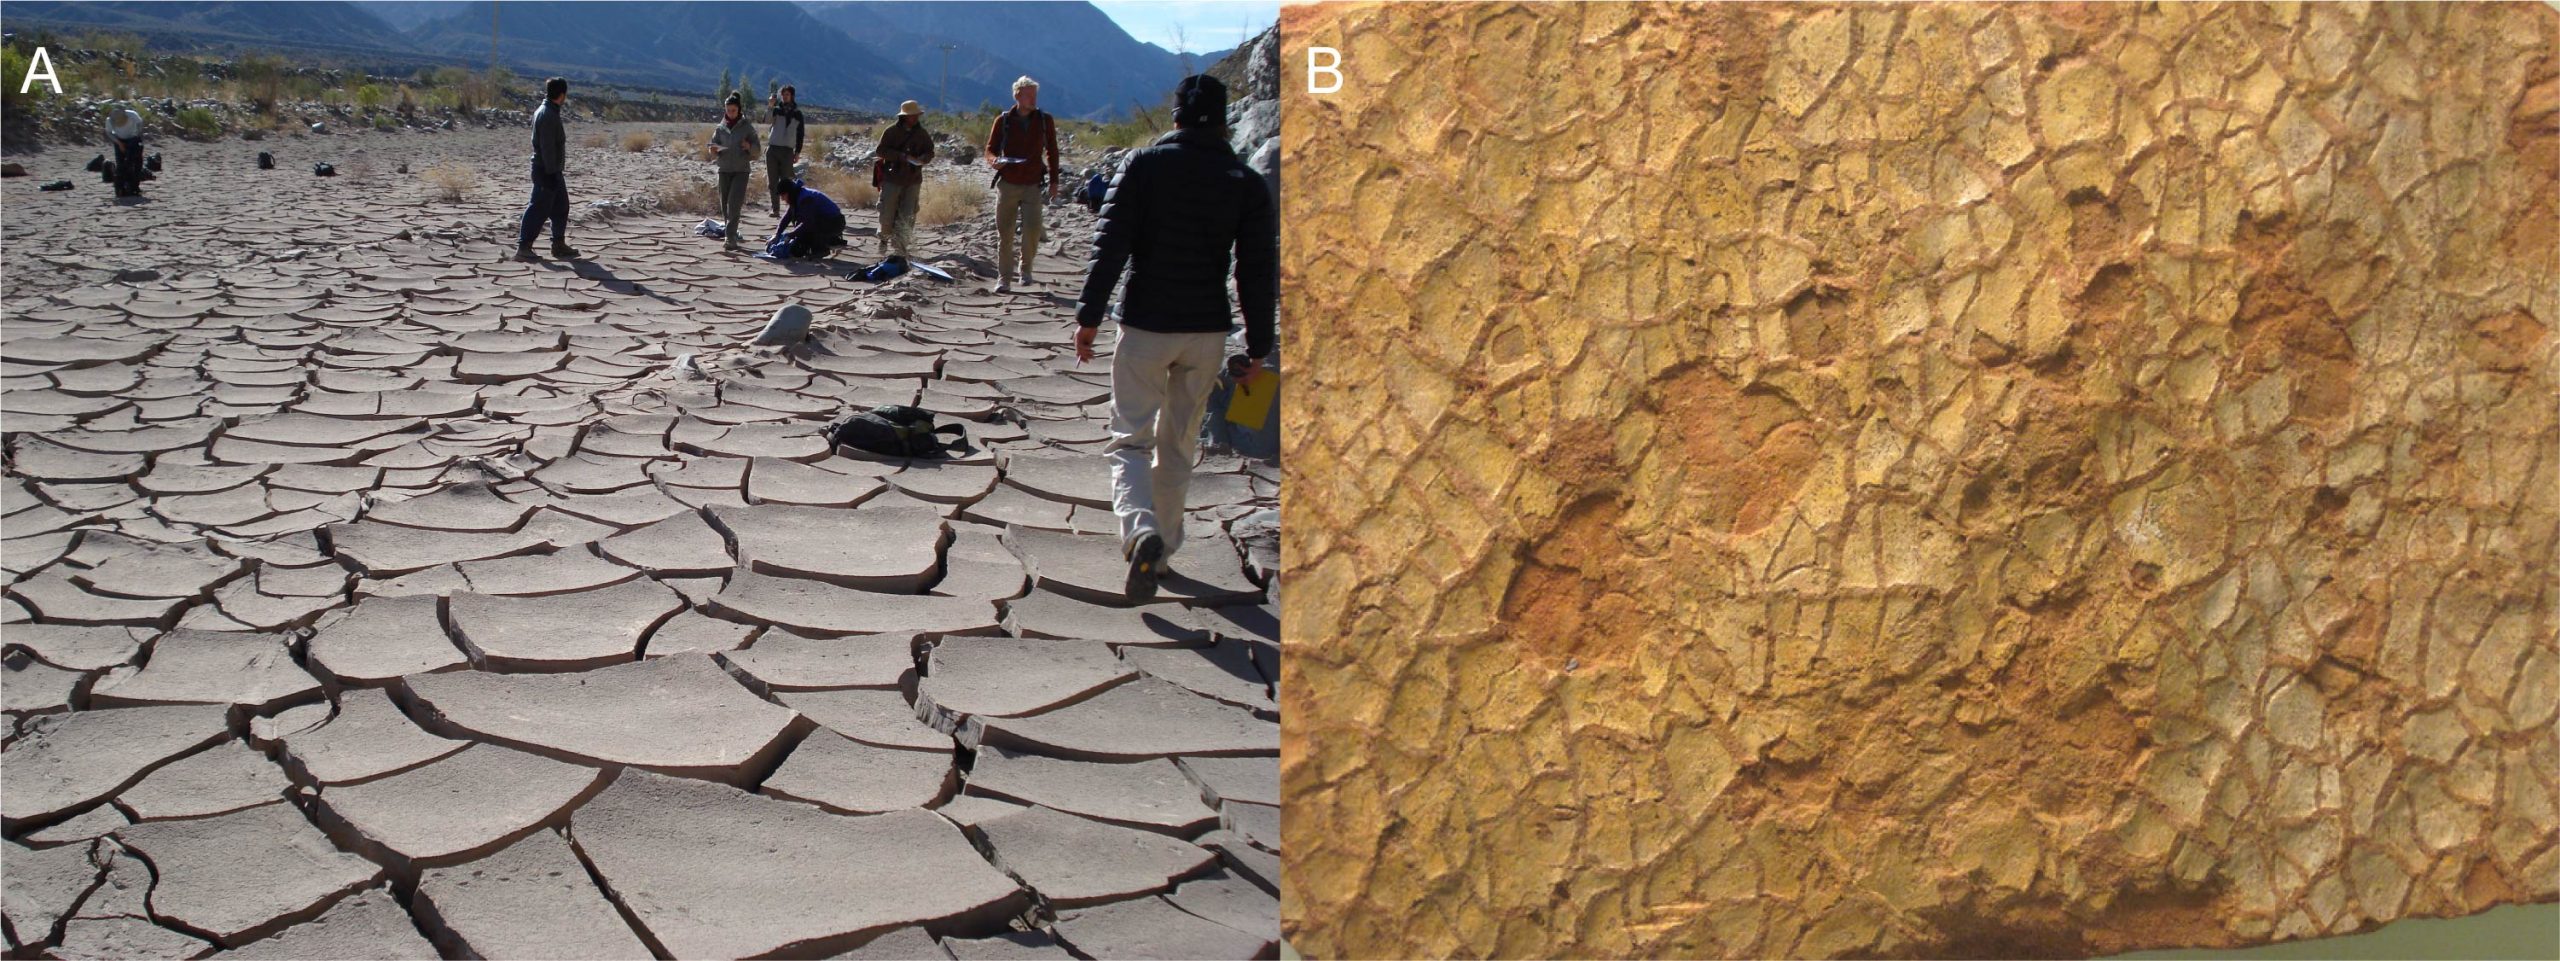 These images show mudcracks. The left image shows modern dried up clay-rich sediment. The right image has ancient cracks.